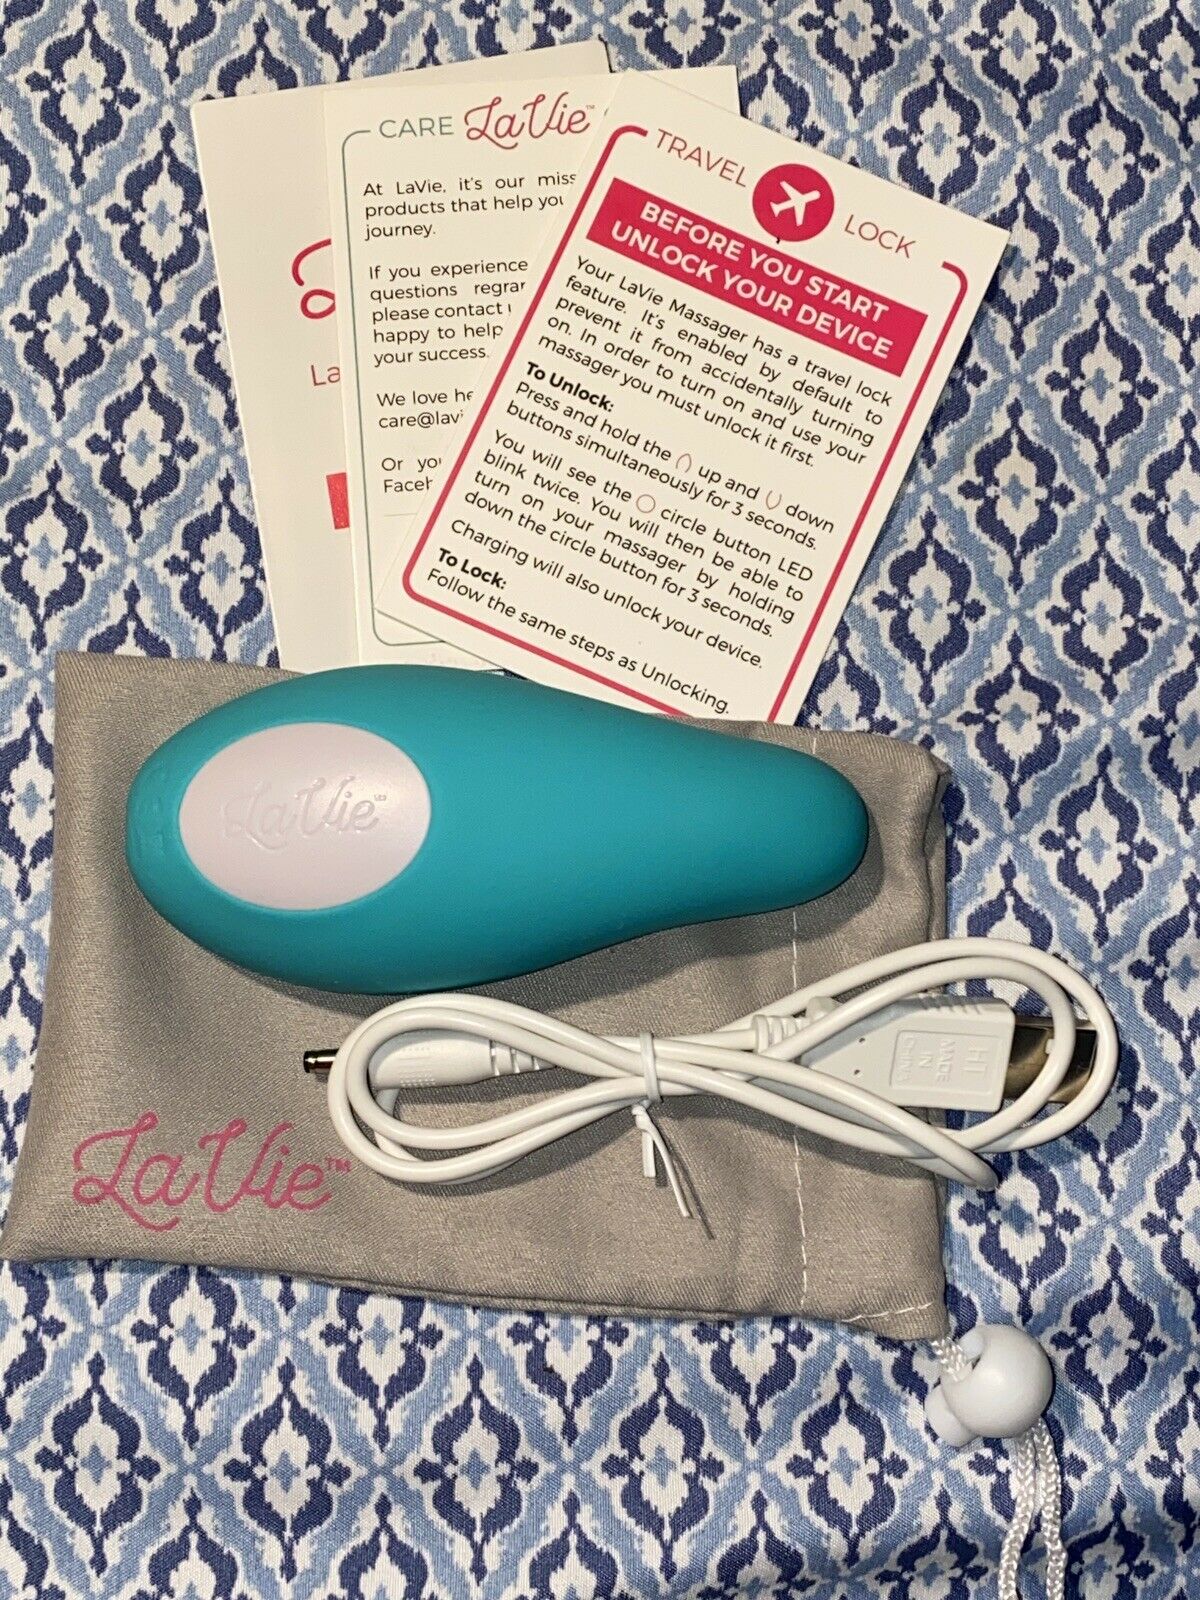 LaVie Lactation Massage Breastfeeding Vibrator with Cord Teal Clogged Duct Help